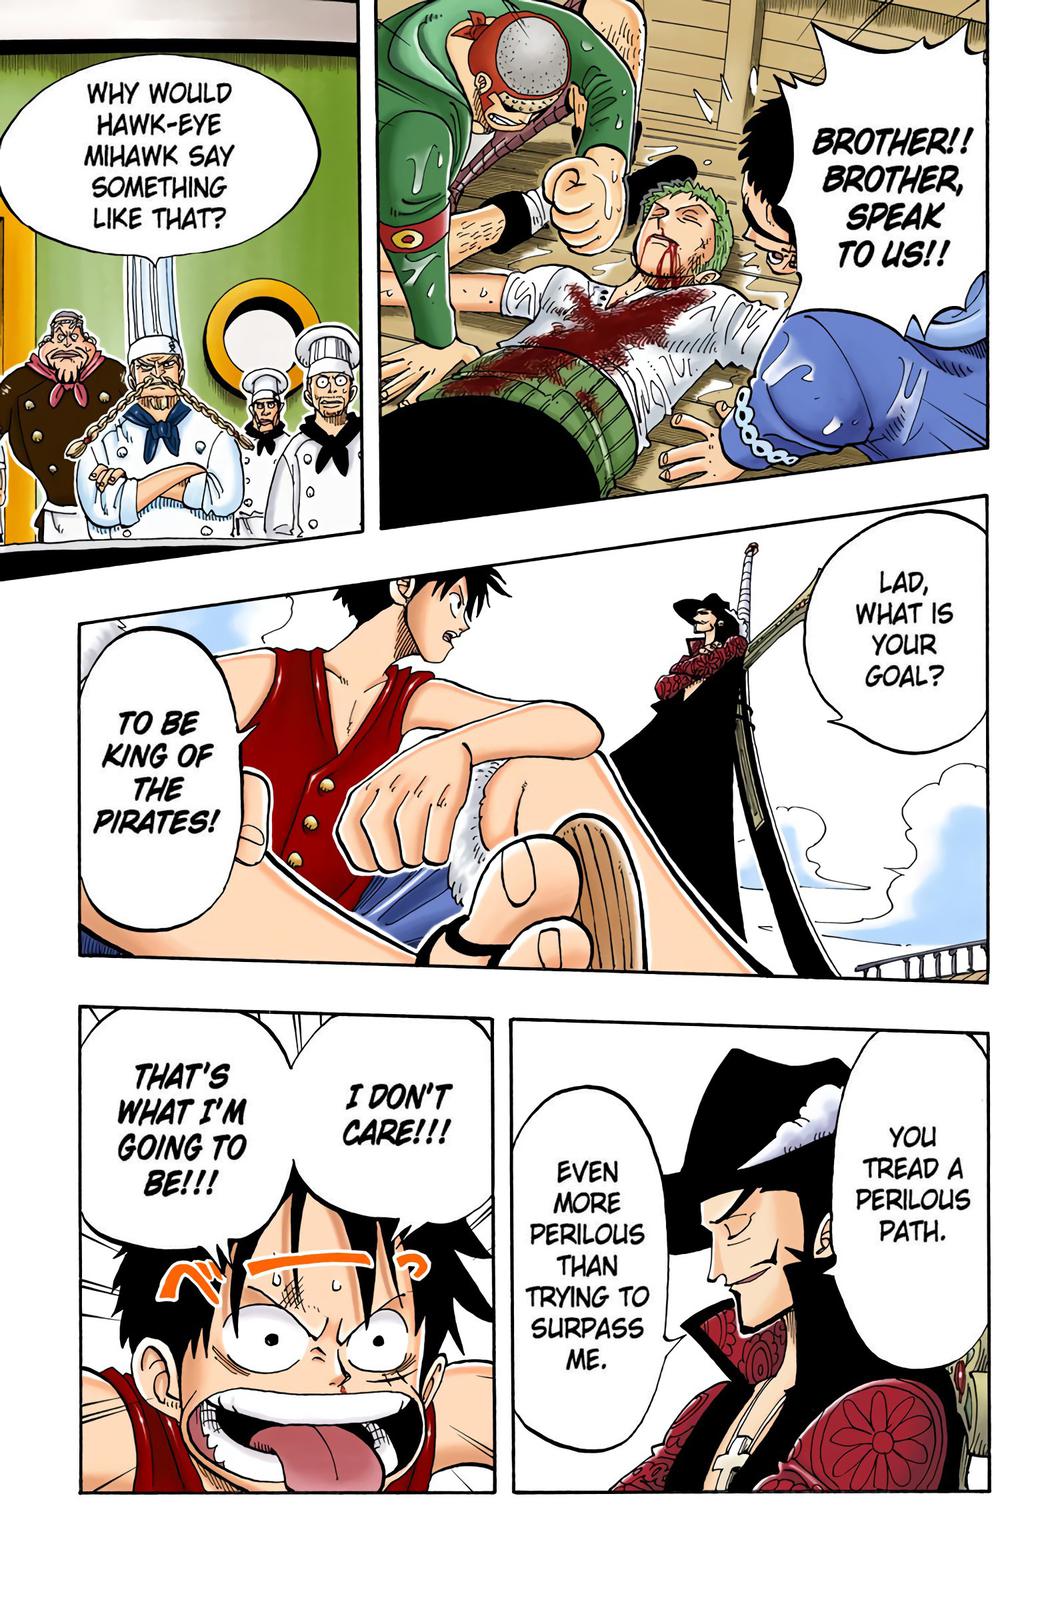 Spoiler - One Piece Chapter 1052 Spoilers Discussion | Page 449 | Worstgen